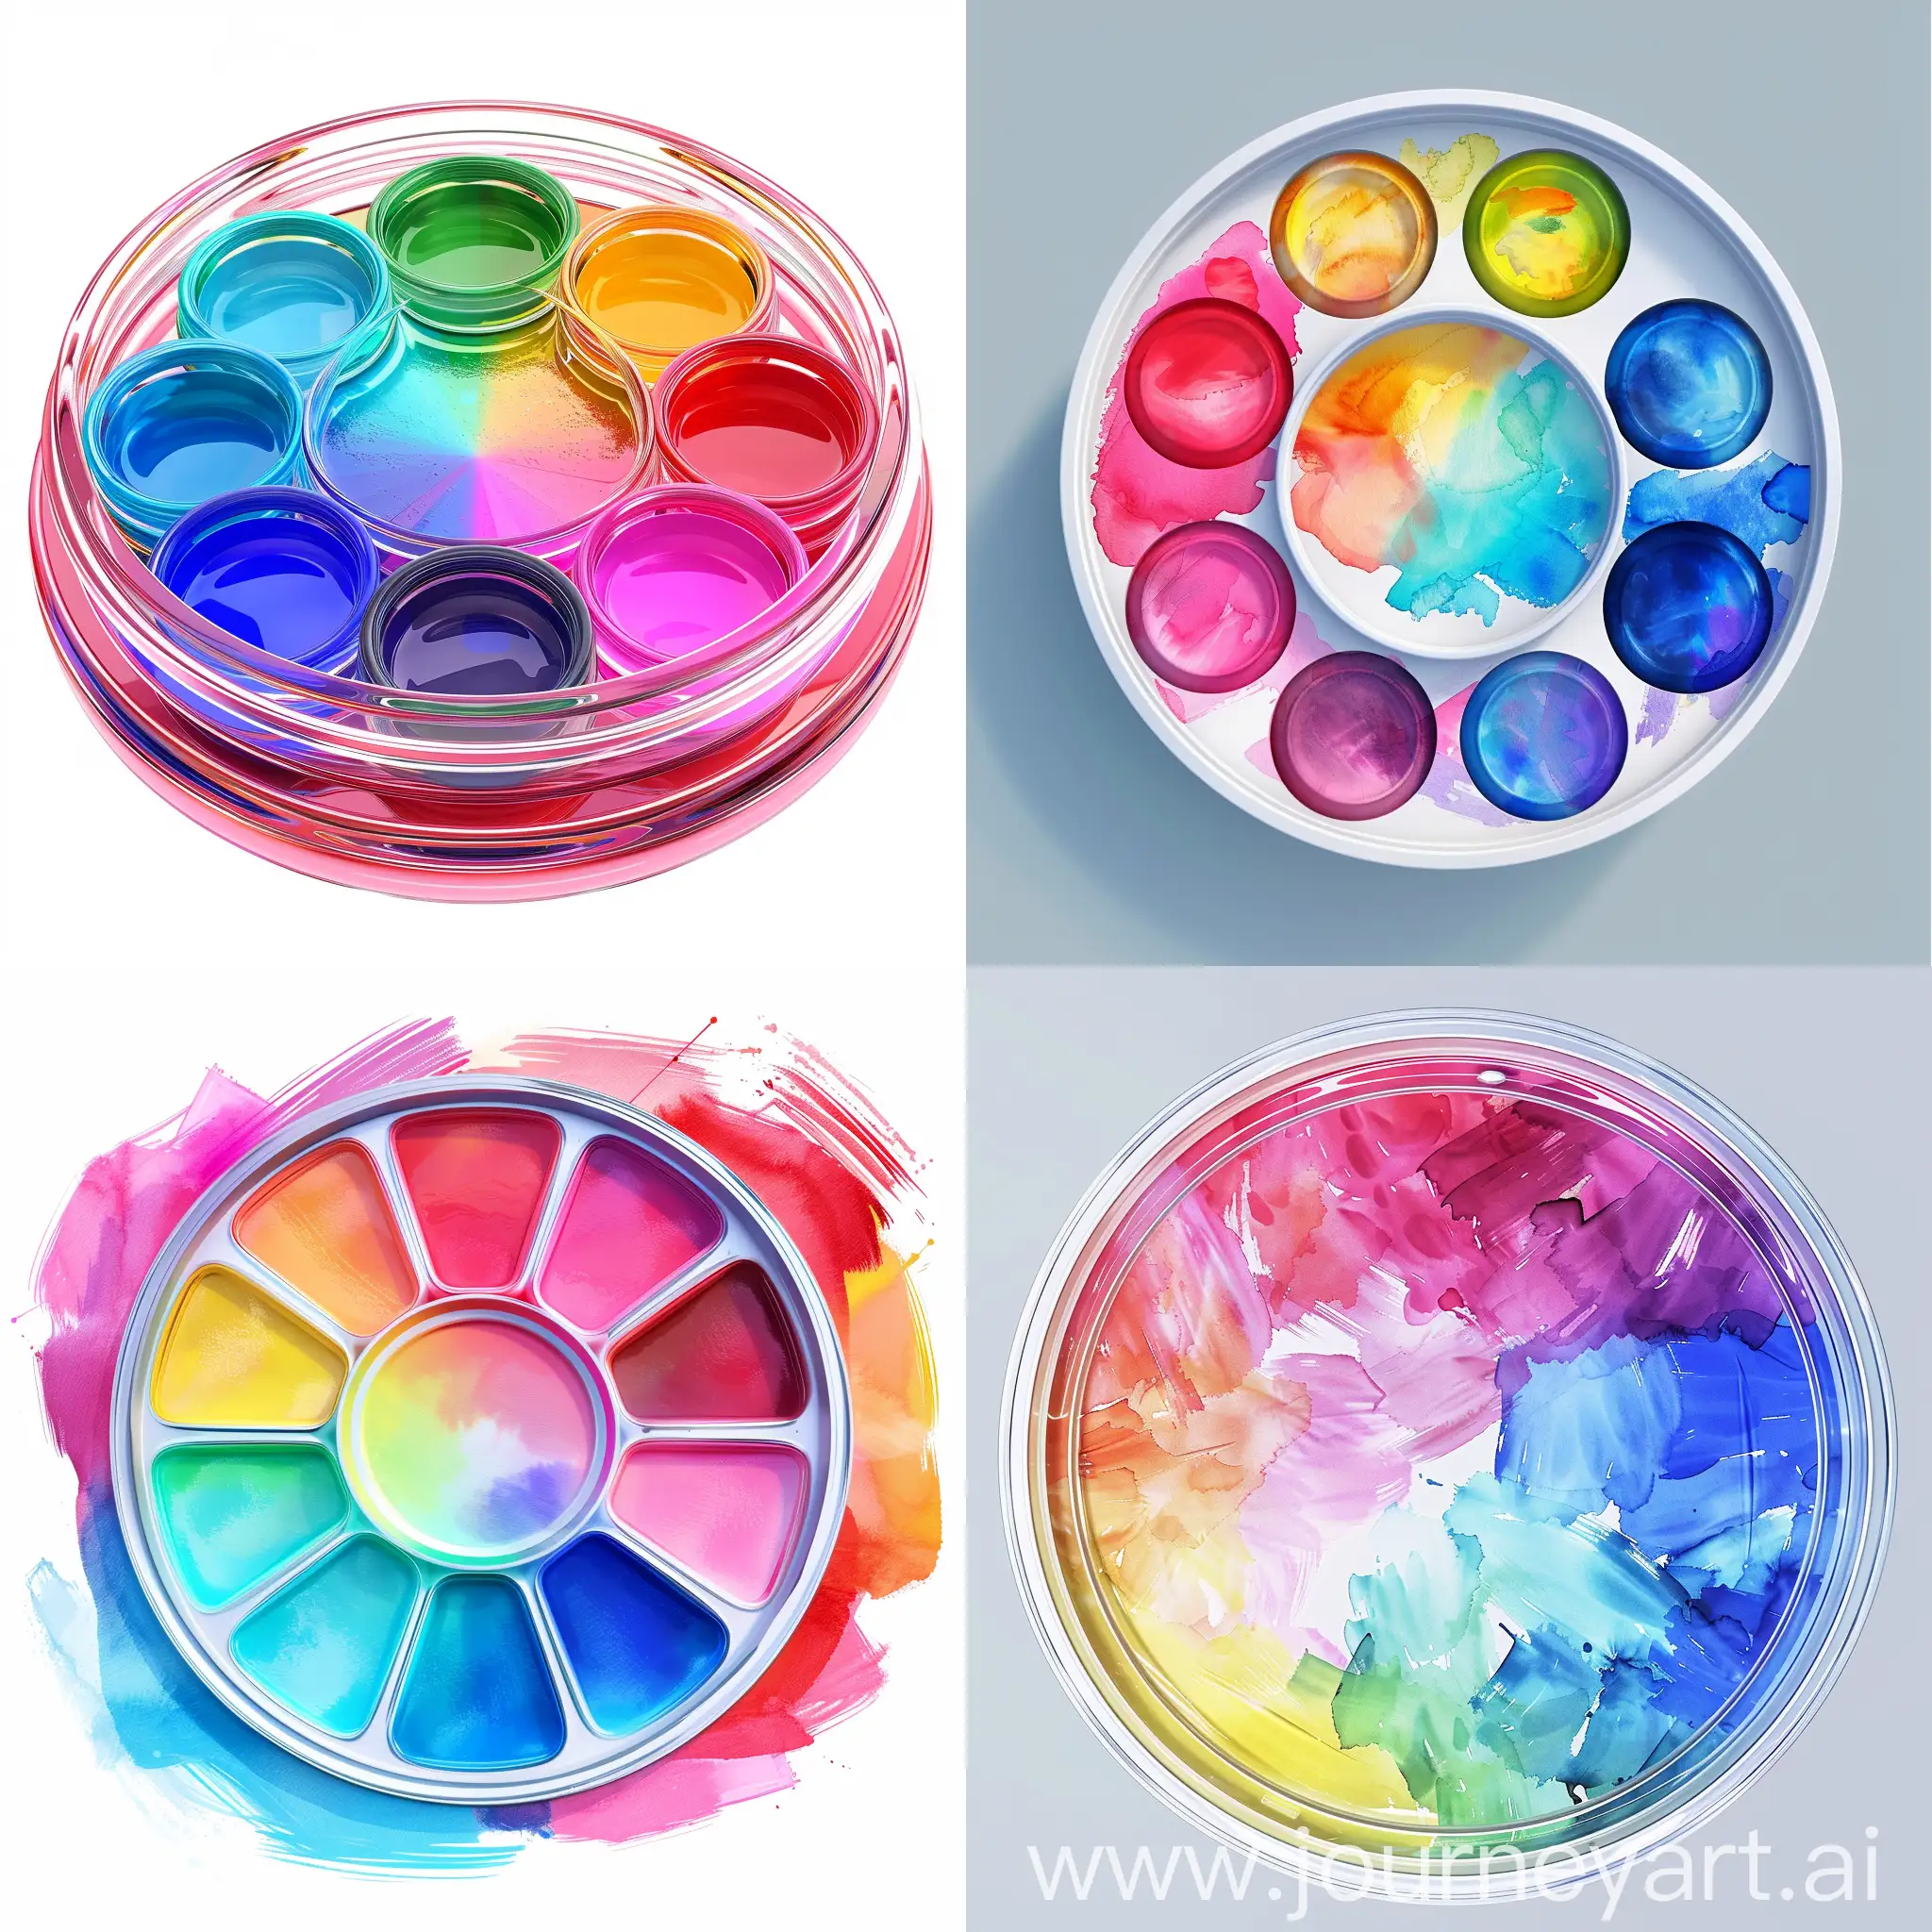 a 3d rendered illustration png of a circular watercolor paint kit having various and vibrant colors and gradients